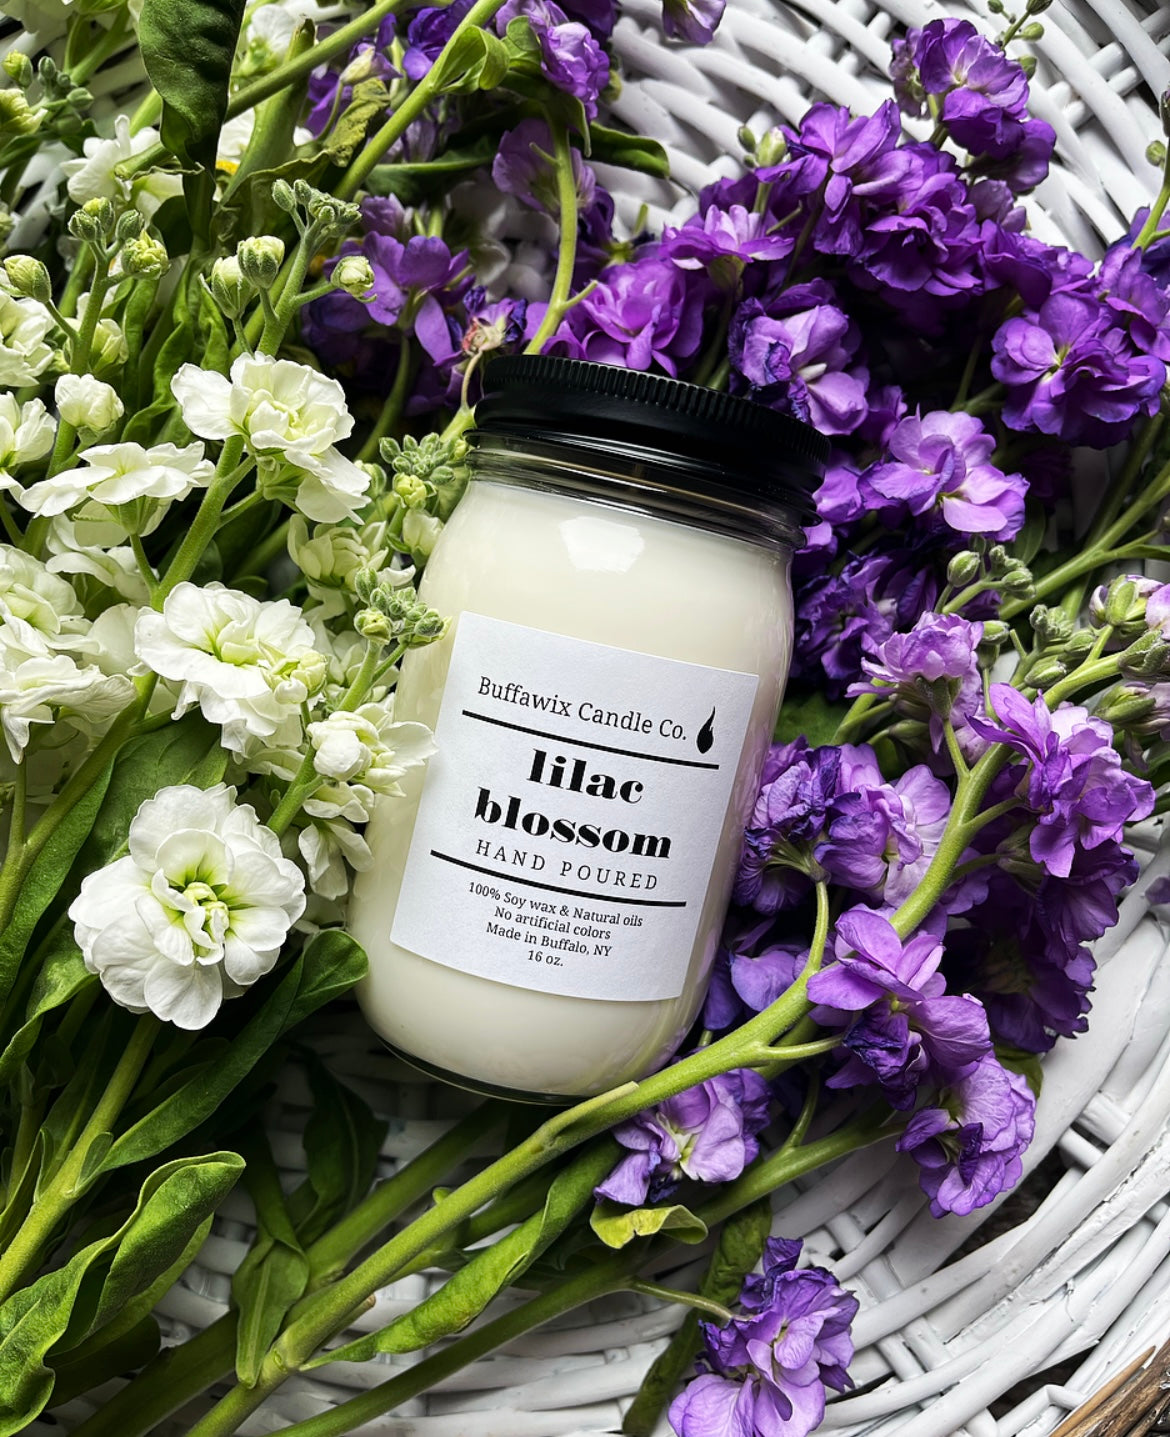 St. John’s fundraiser 16oz lilac blossom pure soy candle